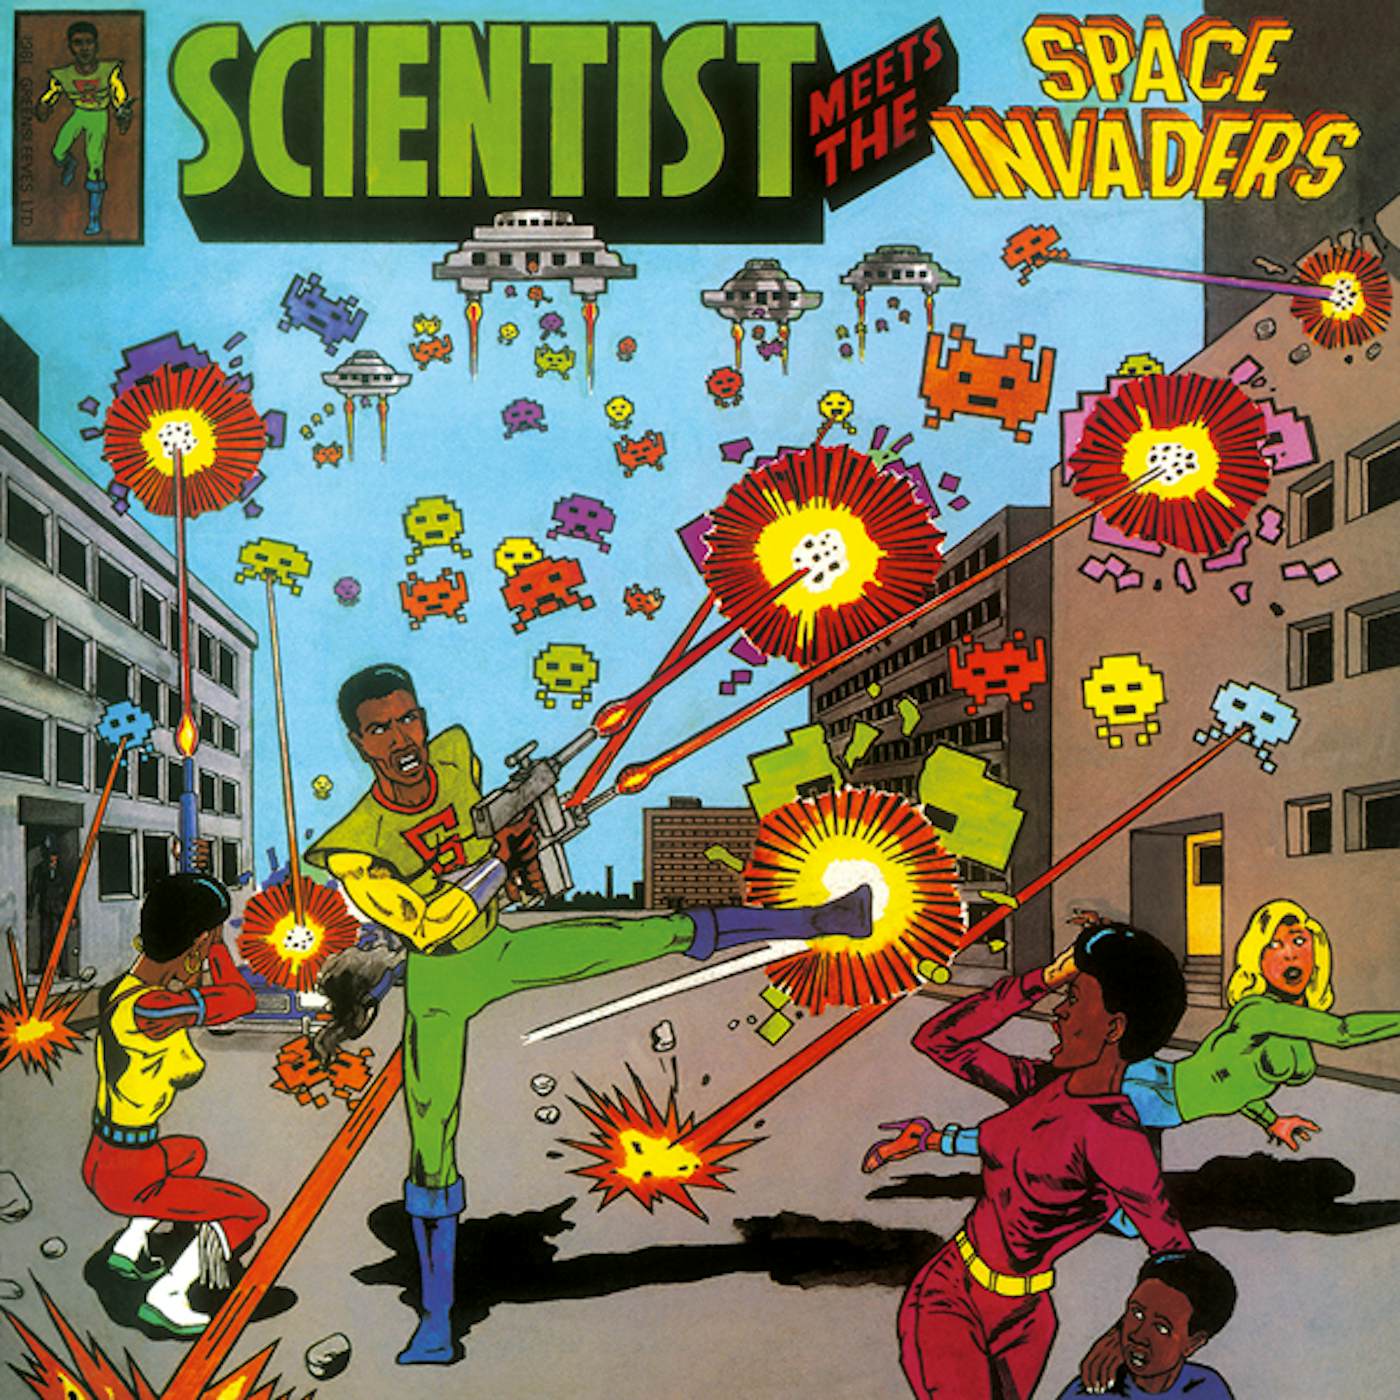 Scientist MEETS THE SPACE INVADERS Vinyl Record